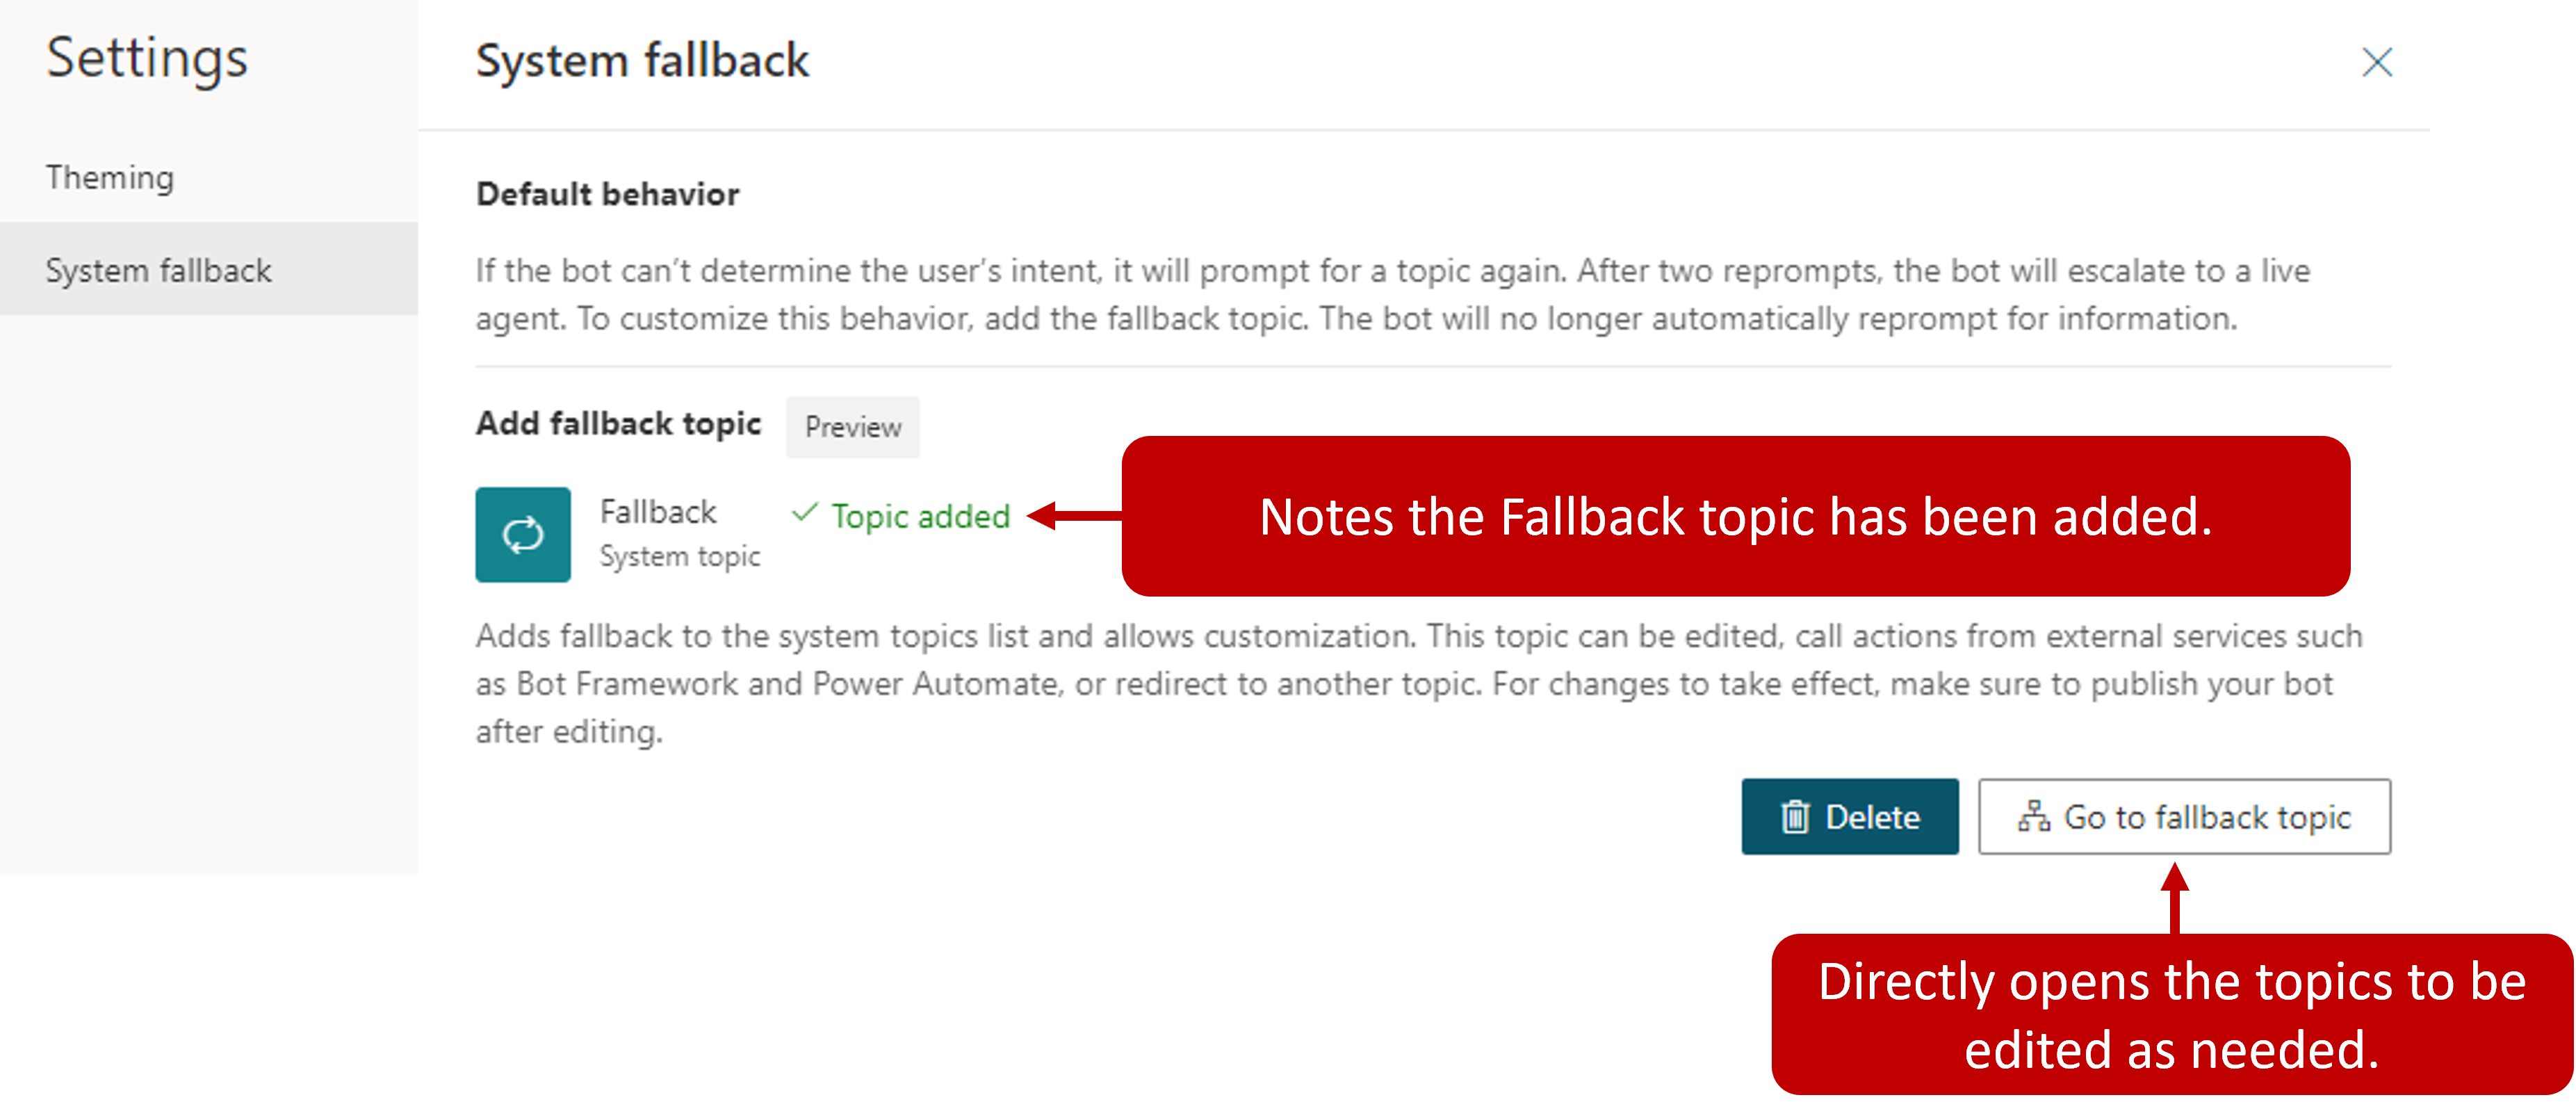 Screenshot showing a topic added for the fallback topic, with the Go to fallback topic button highlighted.